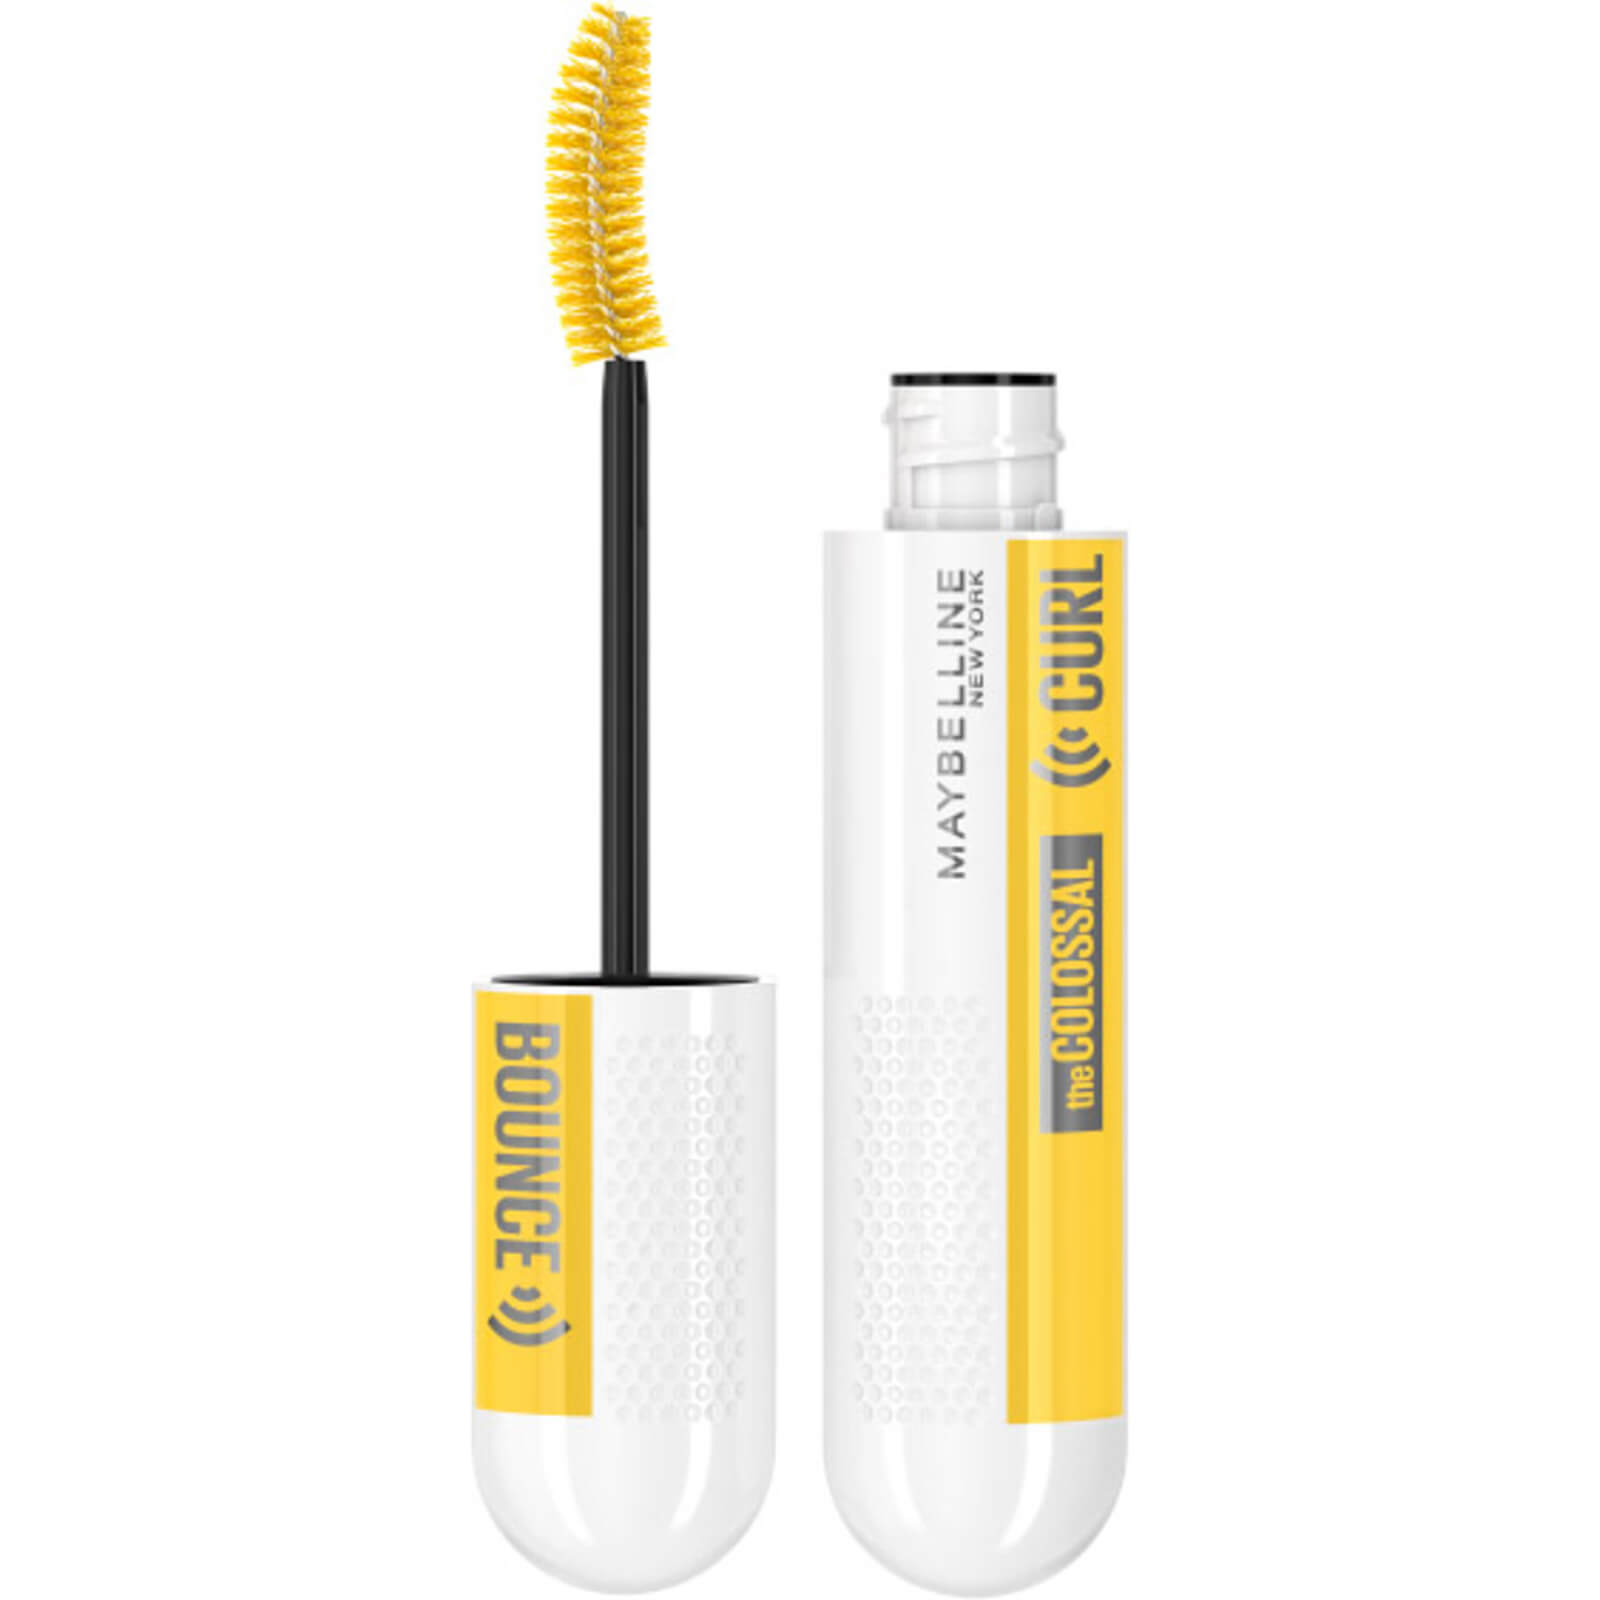 Image of Maybelline Colossal Curl Bounce Mascara - Very Black 61g